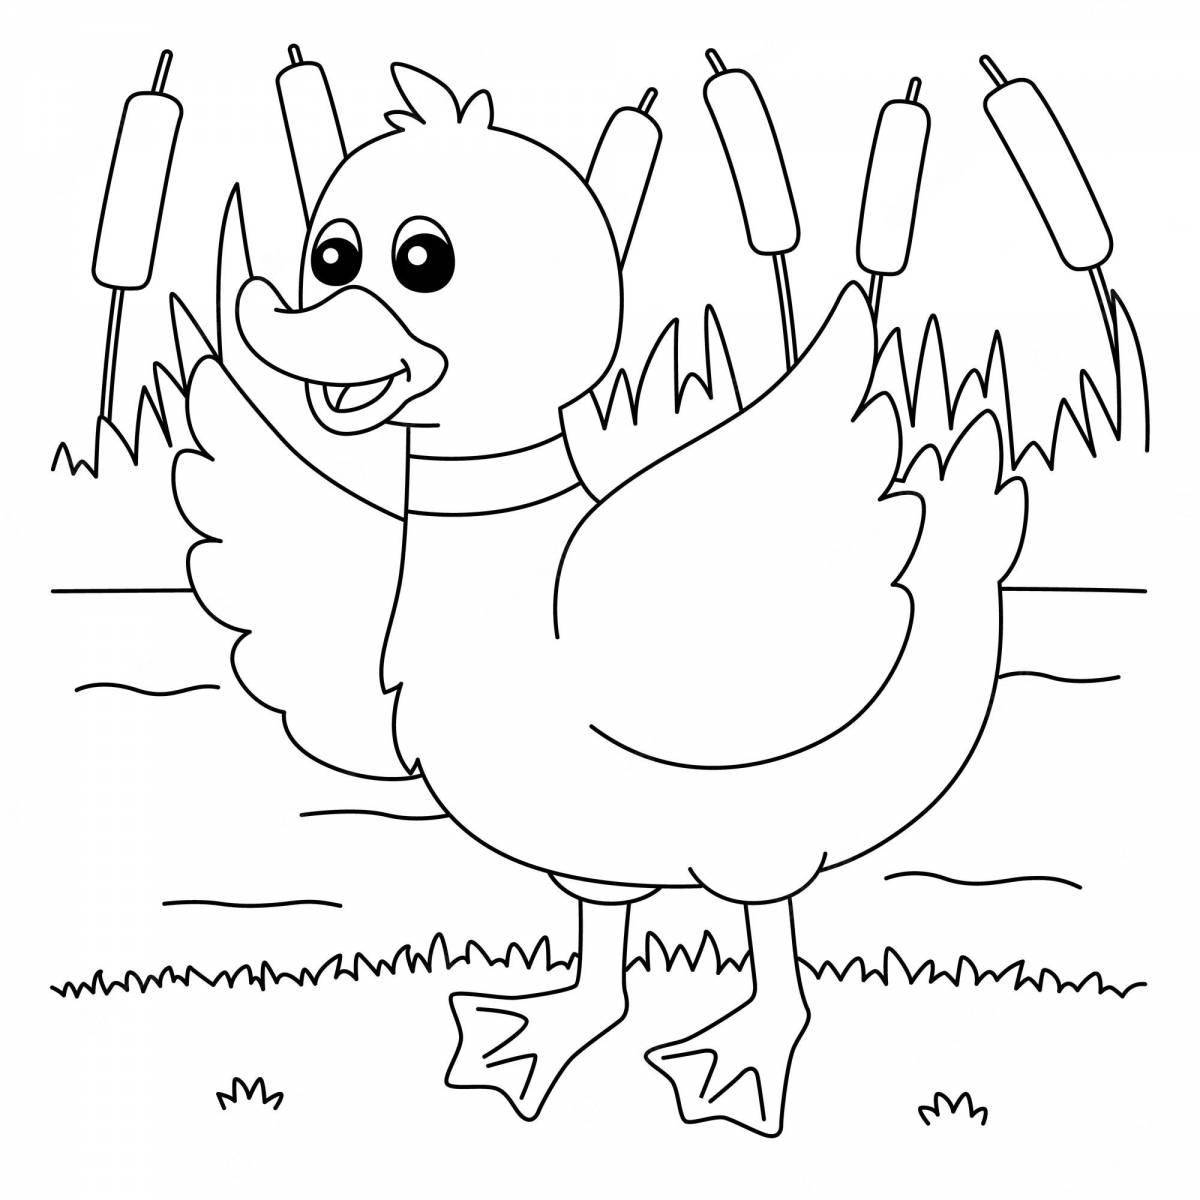 Animated lalanfant duck coloring page